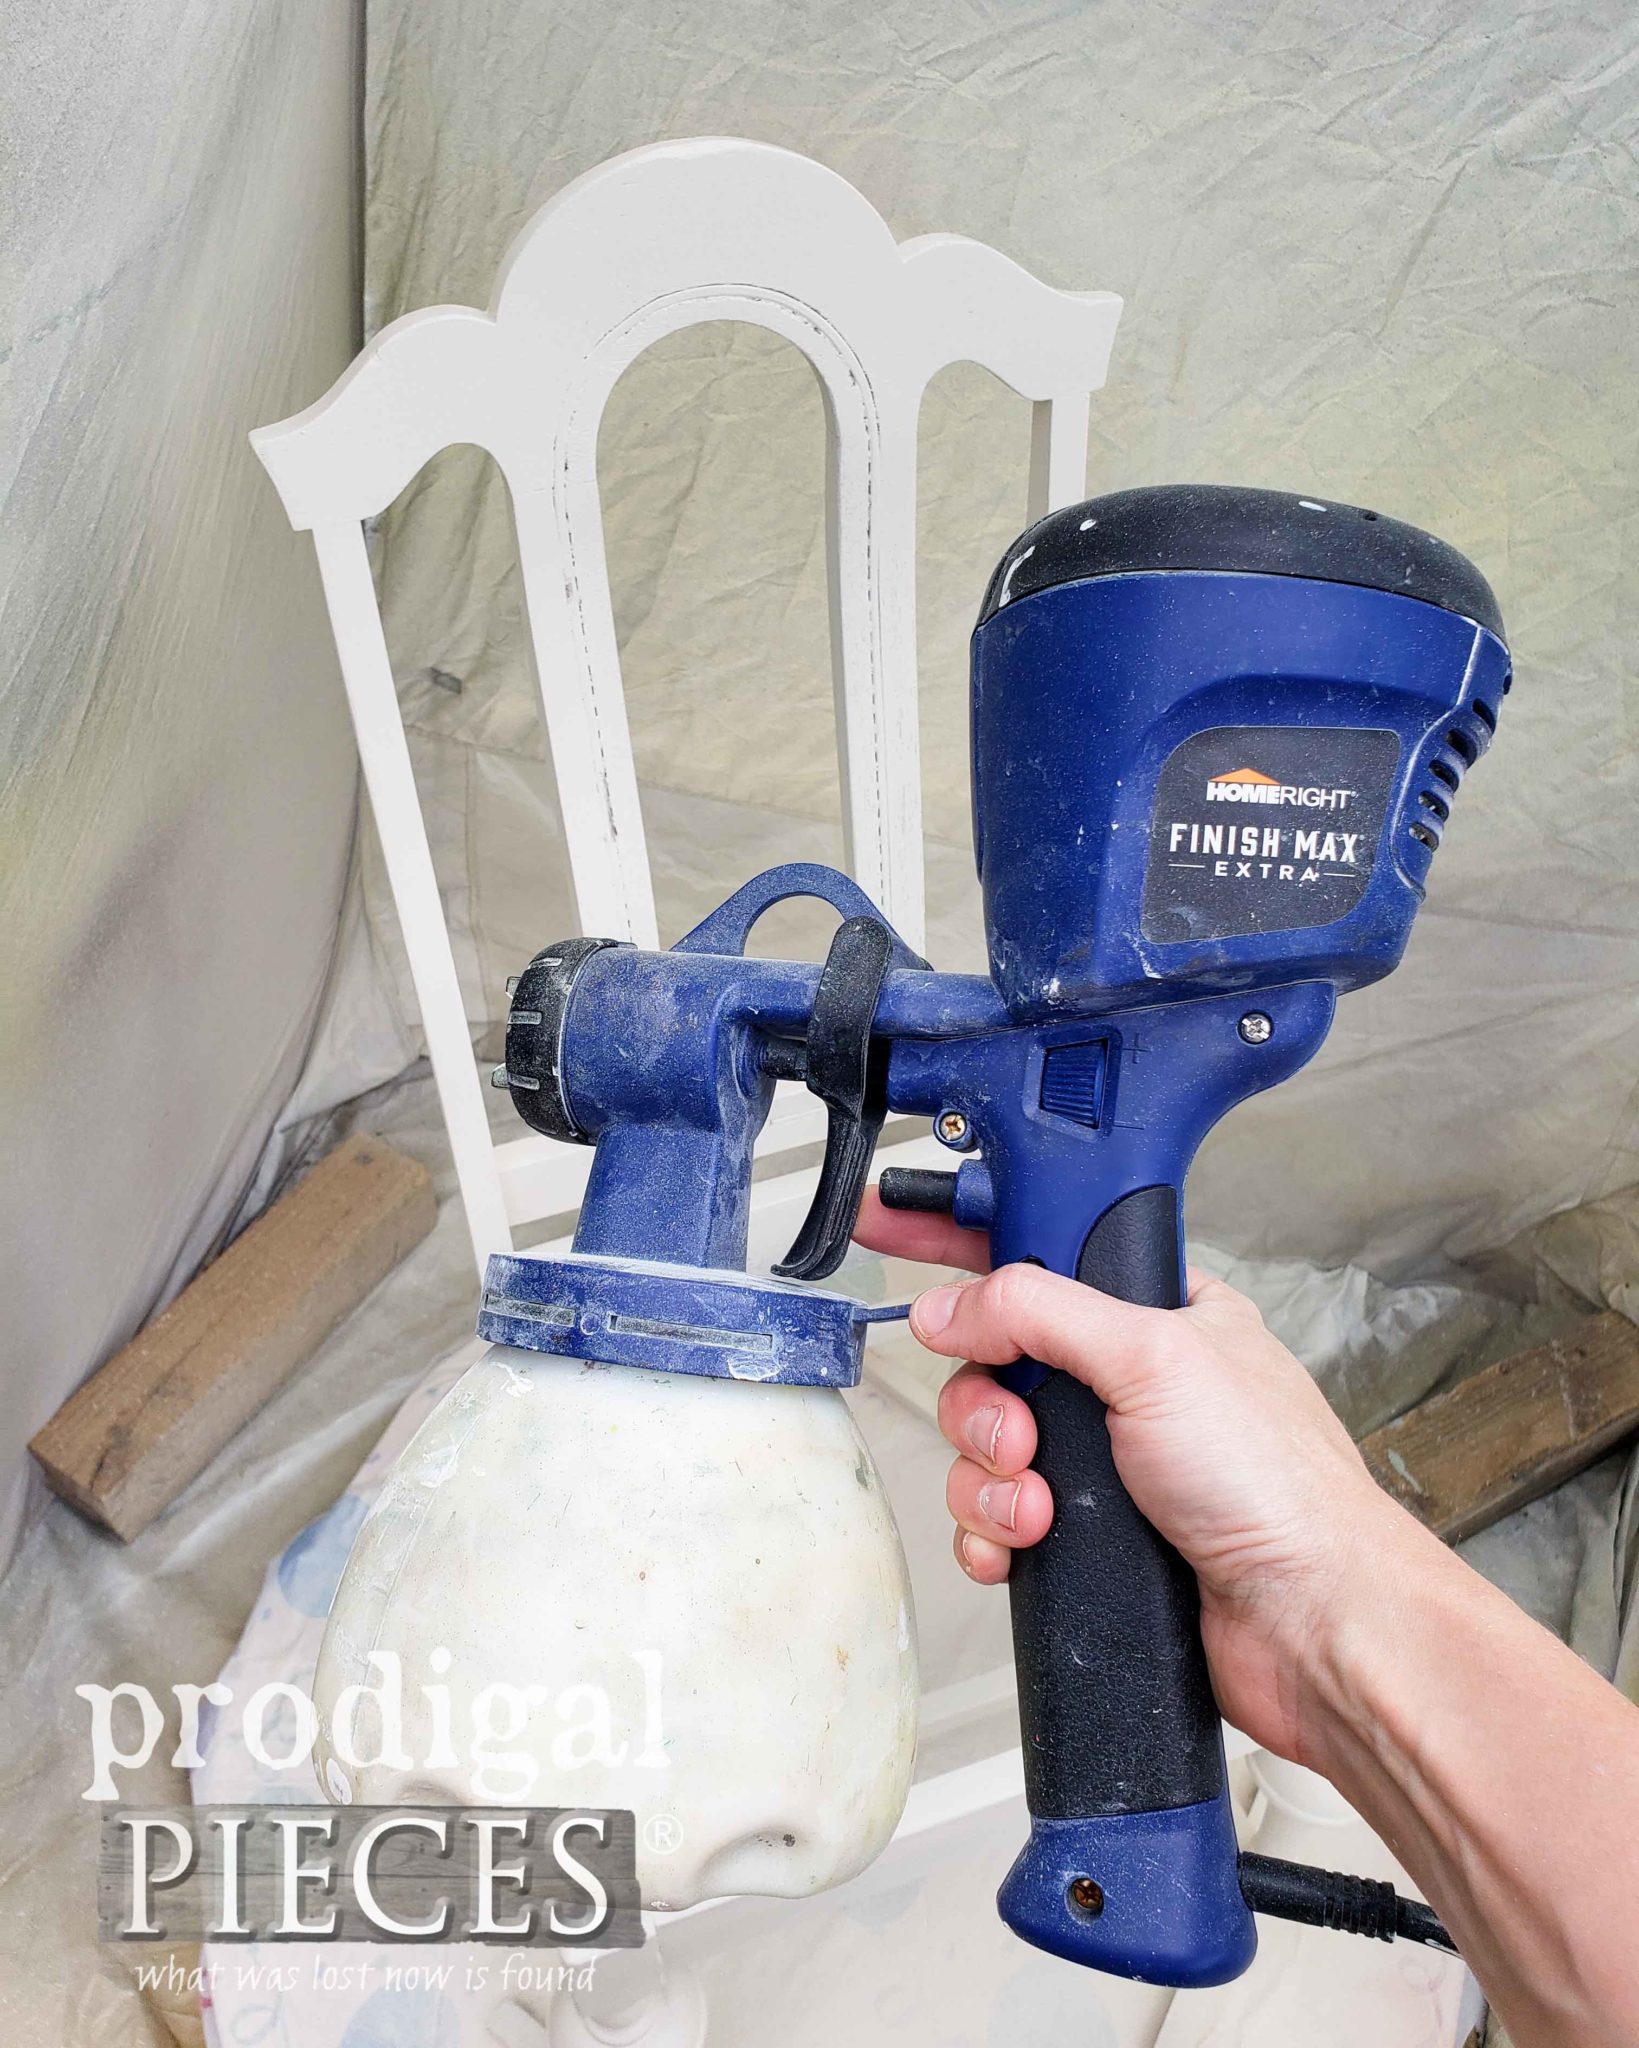 HomeRight Super Finish Max Extra Sprayer for Primer, Paint, Poly, & Stain as demonstrated by Larissa of Prodigal Pieces | prodigalpieces.com #prodigalpieces #diy #furniture #home #homedecor #tools